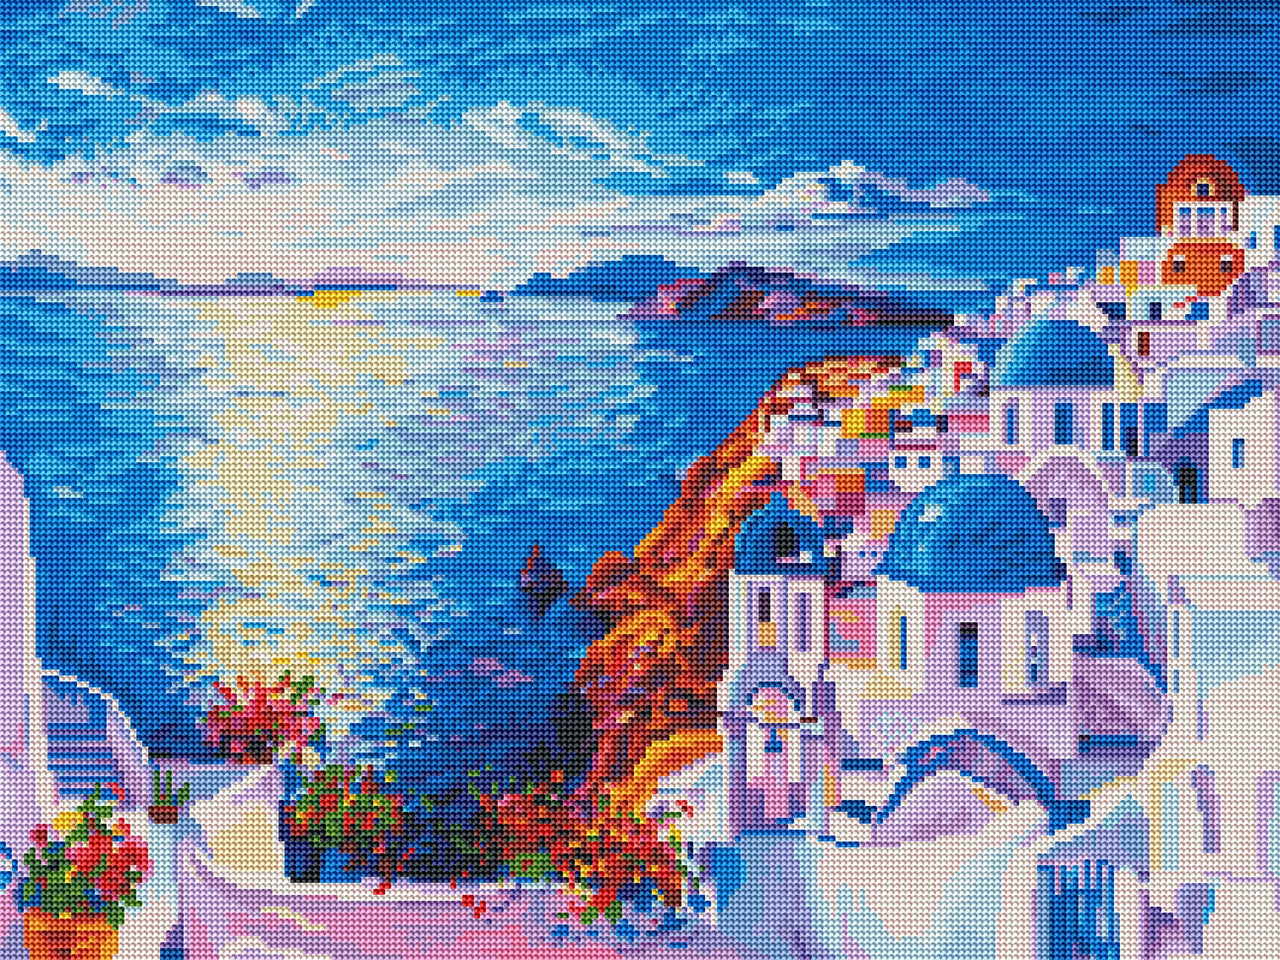 Diamond Painting In Santorini 18" x 24″ (46cm x 61cm) / Round with 40 Colors including 2 ABs